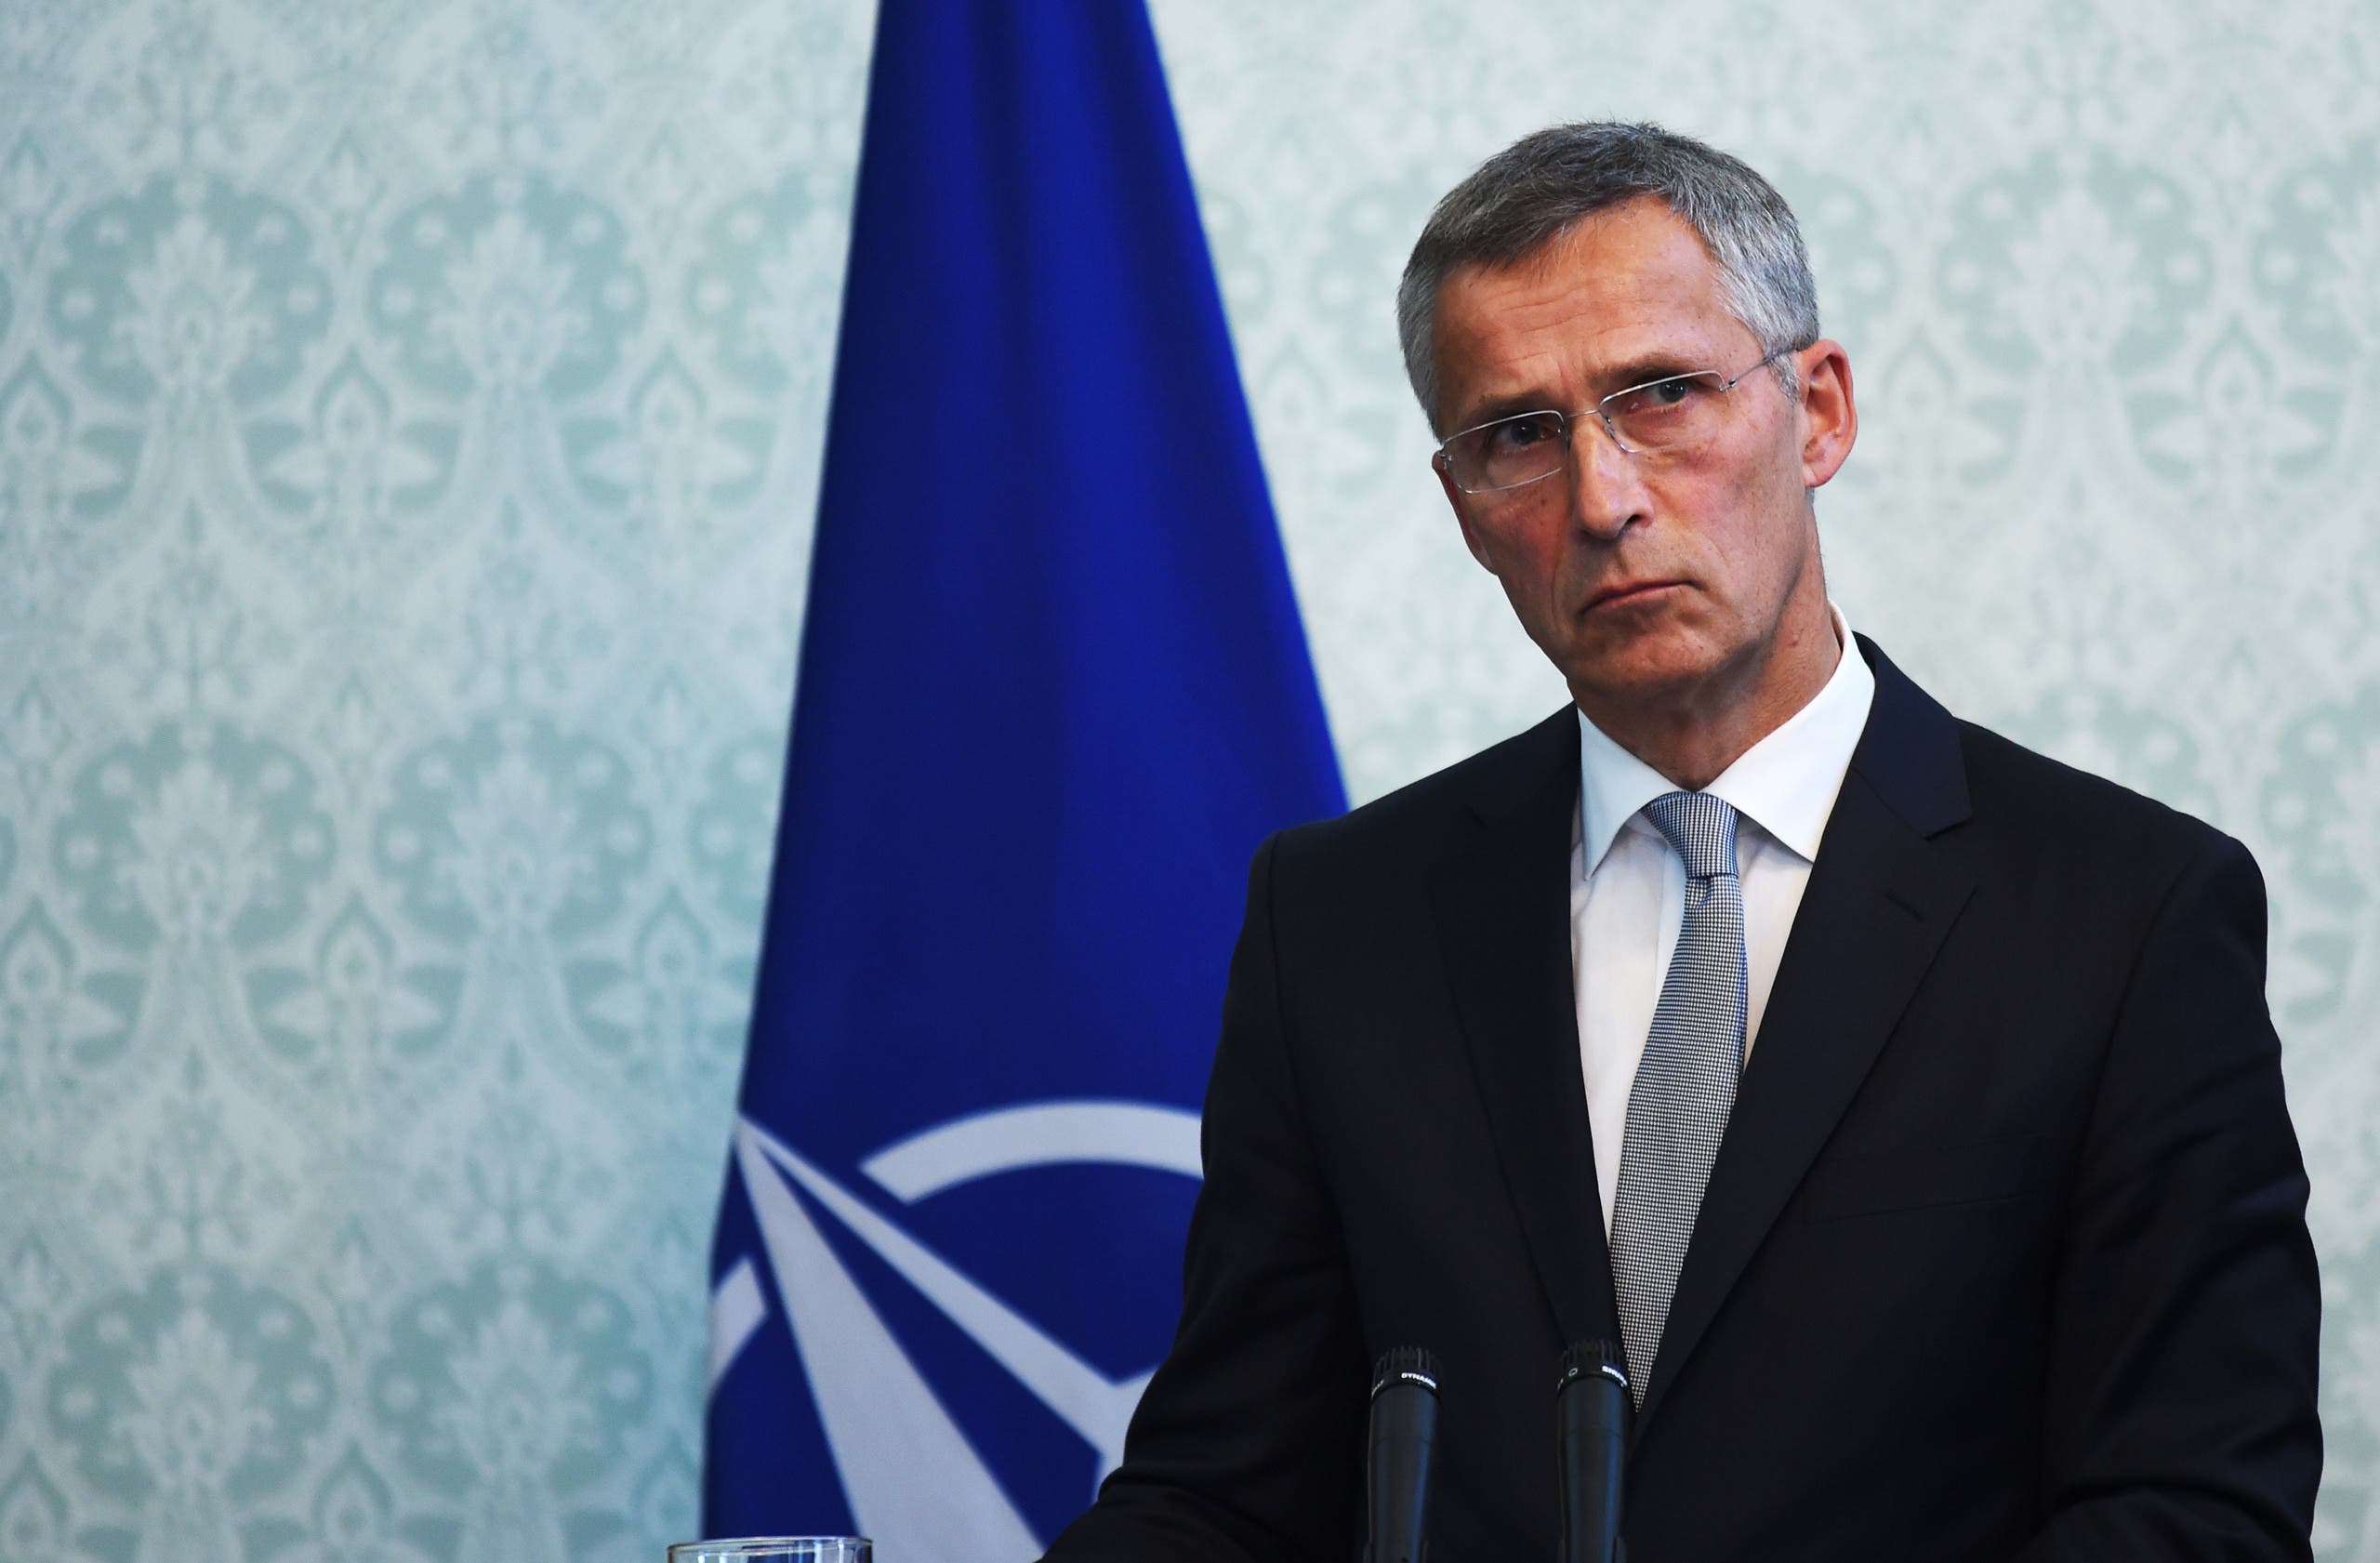 NATO chief Jens Stoltenberg looks on during a joint press conference with Afghan President Ashraf Ghani and US Defense Secretary Jim Mattis at the Presidential Palace in Kabul on September 27, 2017. US Defense Secretary Jim Mattis and NATO chief Jens Stoltenberg renewed their commitment to Afghanistan on September 27, as the Taliban launched a rocket attack that wounded five civilians in Kabul.  WAKIL KOHSAR / AFP